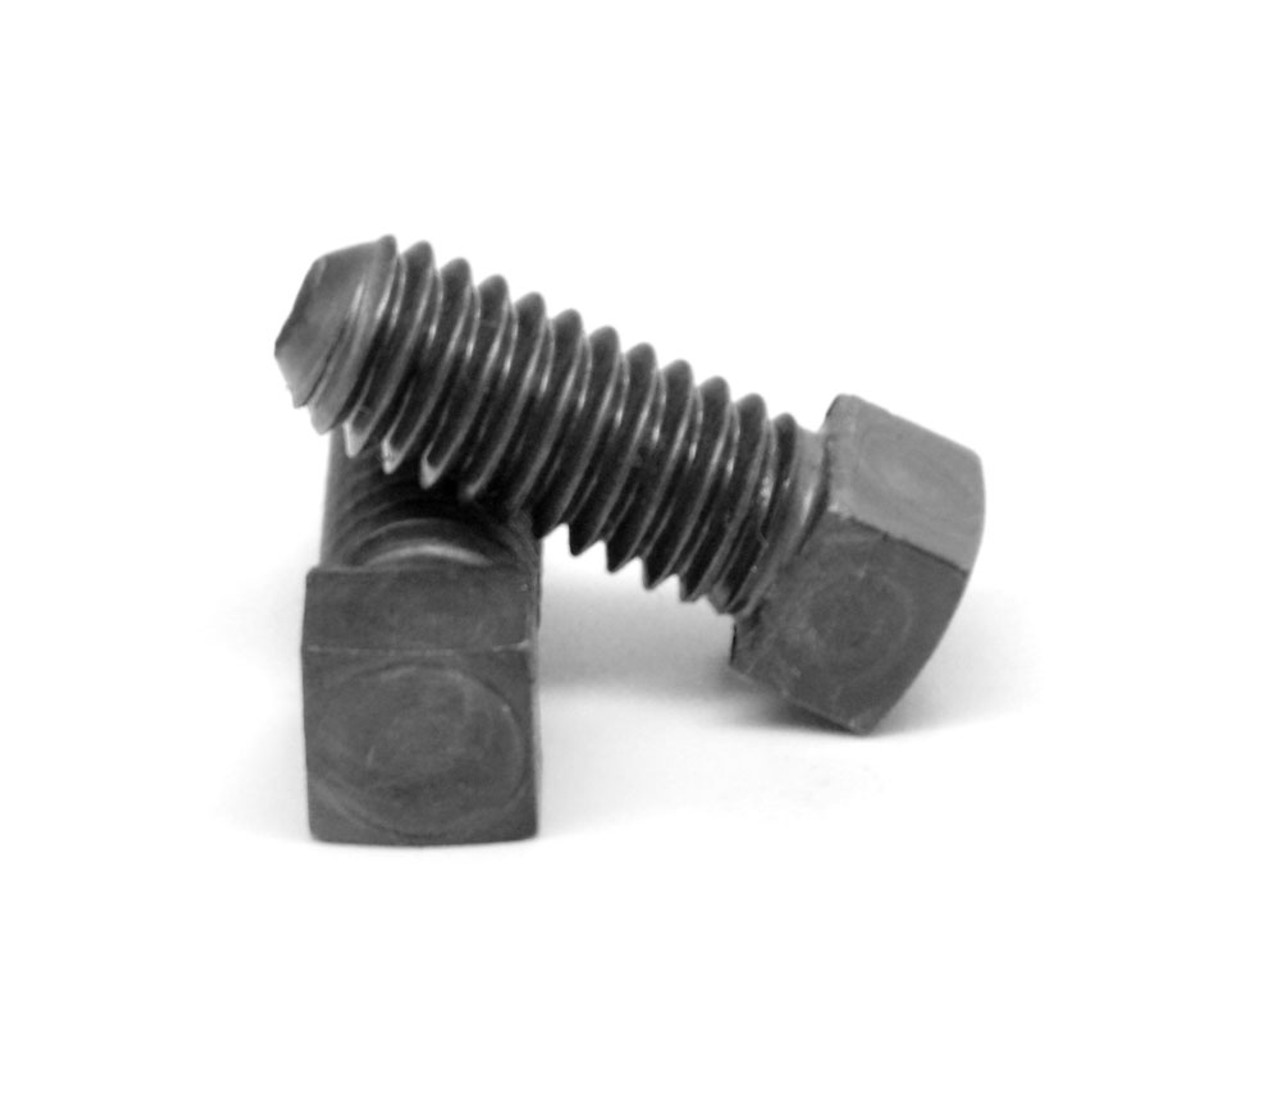 5/8"-11 x 3 1/2" (FT) Coarse Thread Square Head Set Screw Cup Point Low Carbon Steel Case Hardened Plain Finish